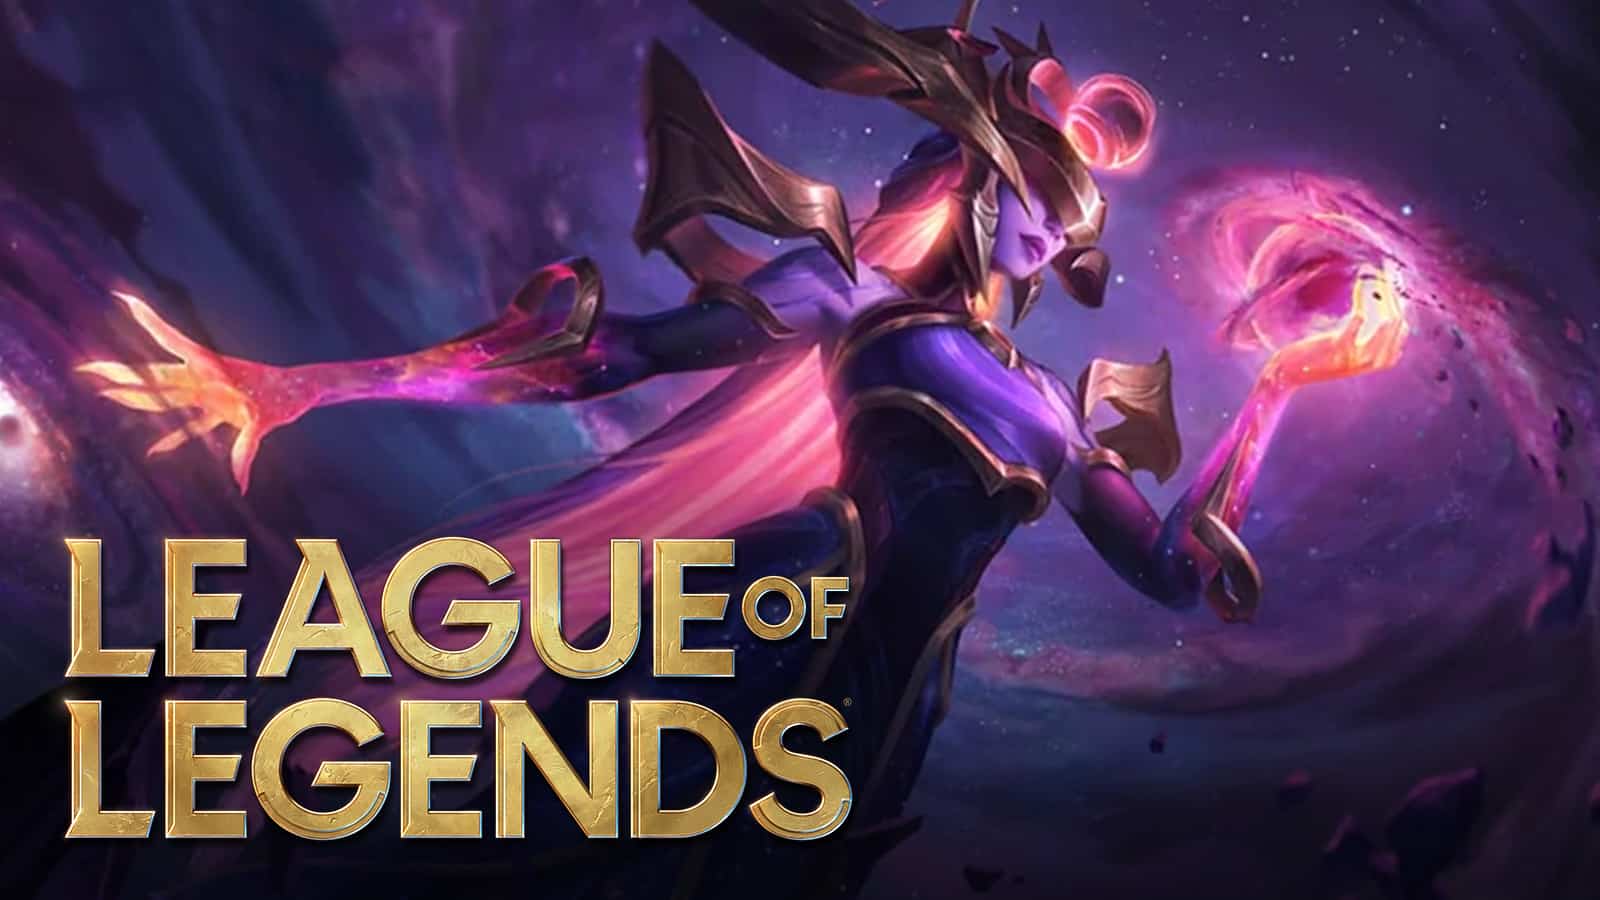 Lissandra looms over League of Legends logo in potential jungle buffs.